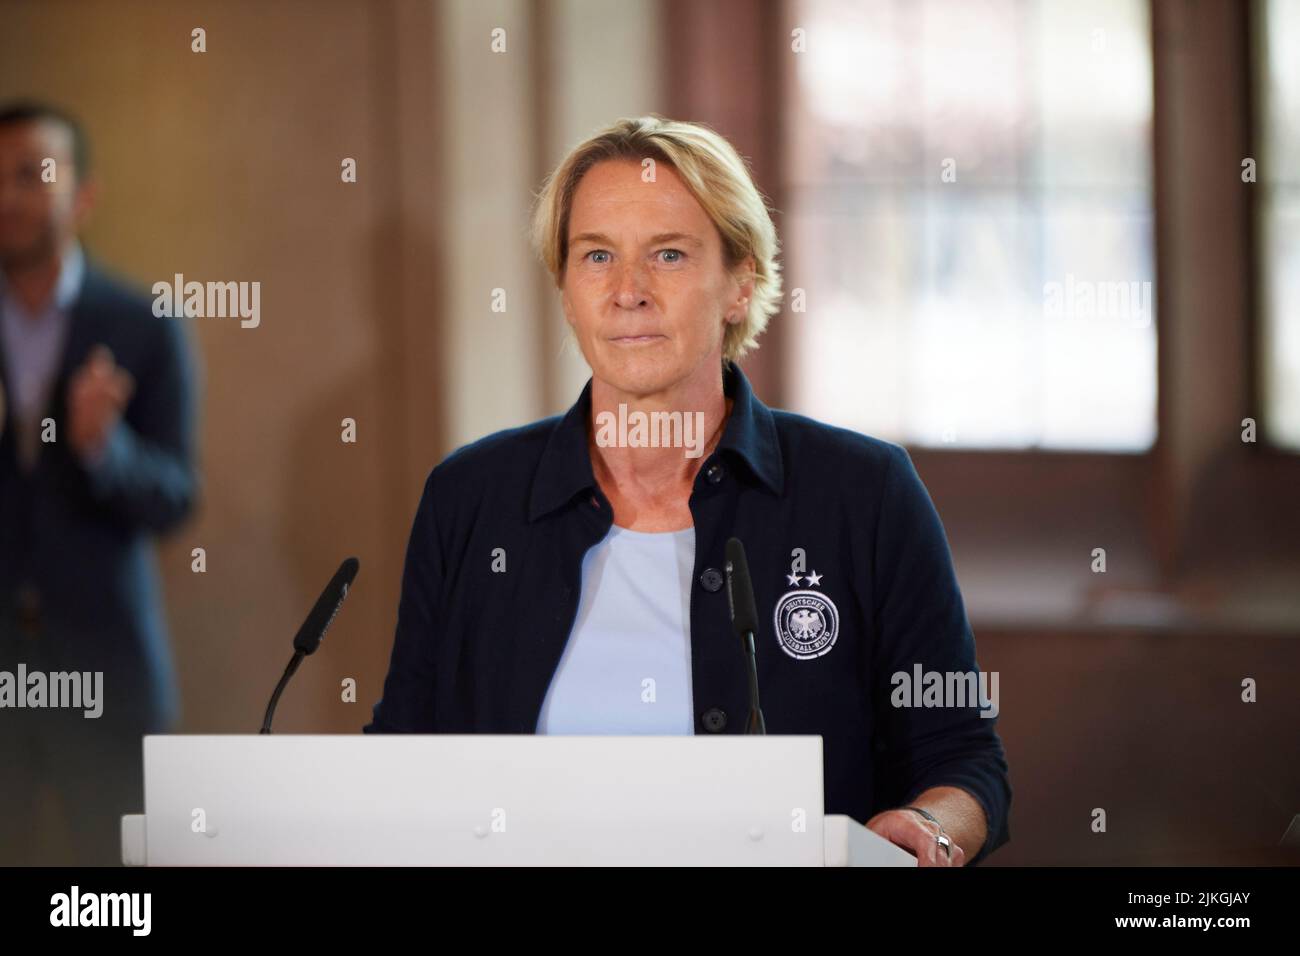 GERMANY, FRANKFURT - AUGUST 1, 2022: Germany's head coach Martina Voss-Tecklenburg. the German national women's football team after they placed second Stock Photo